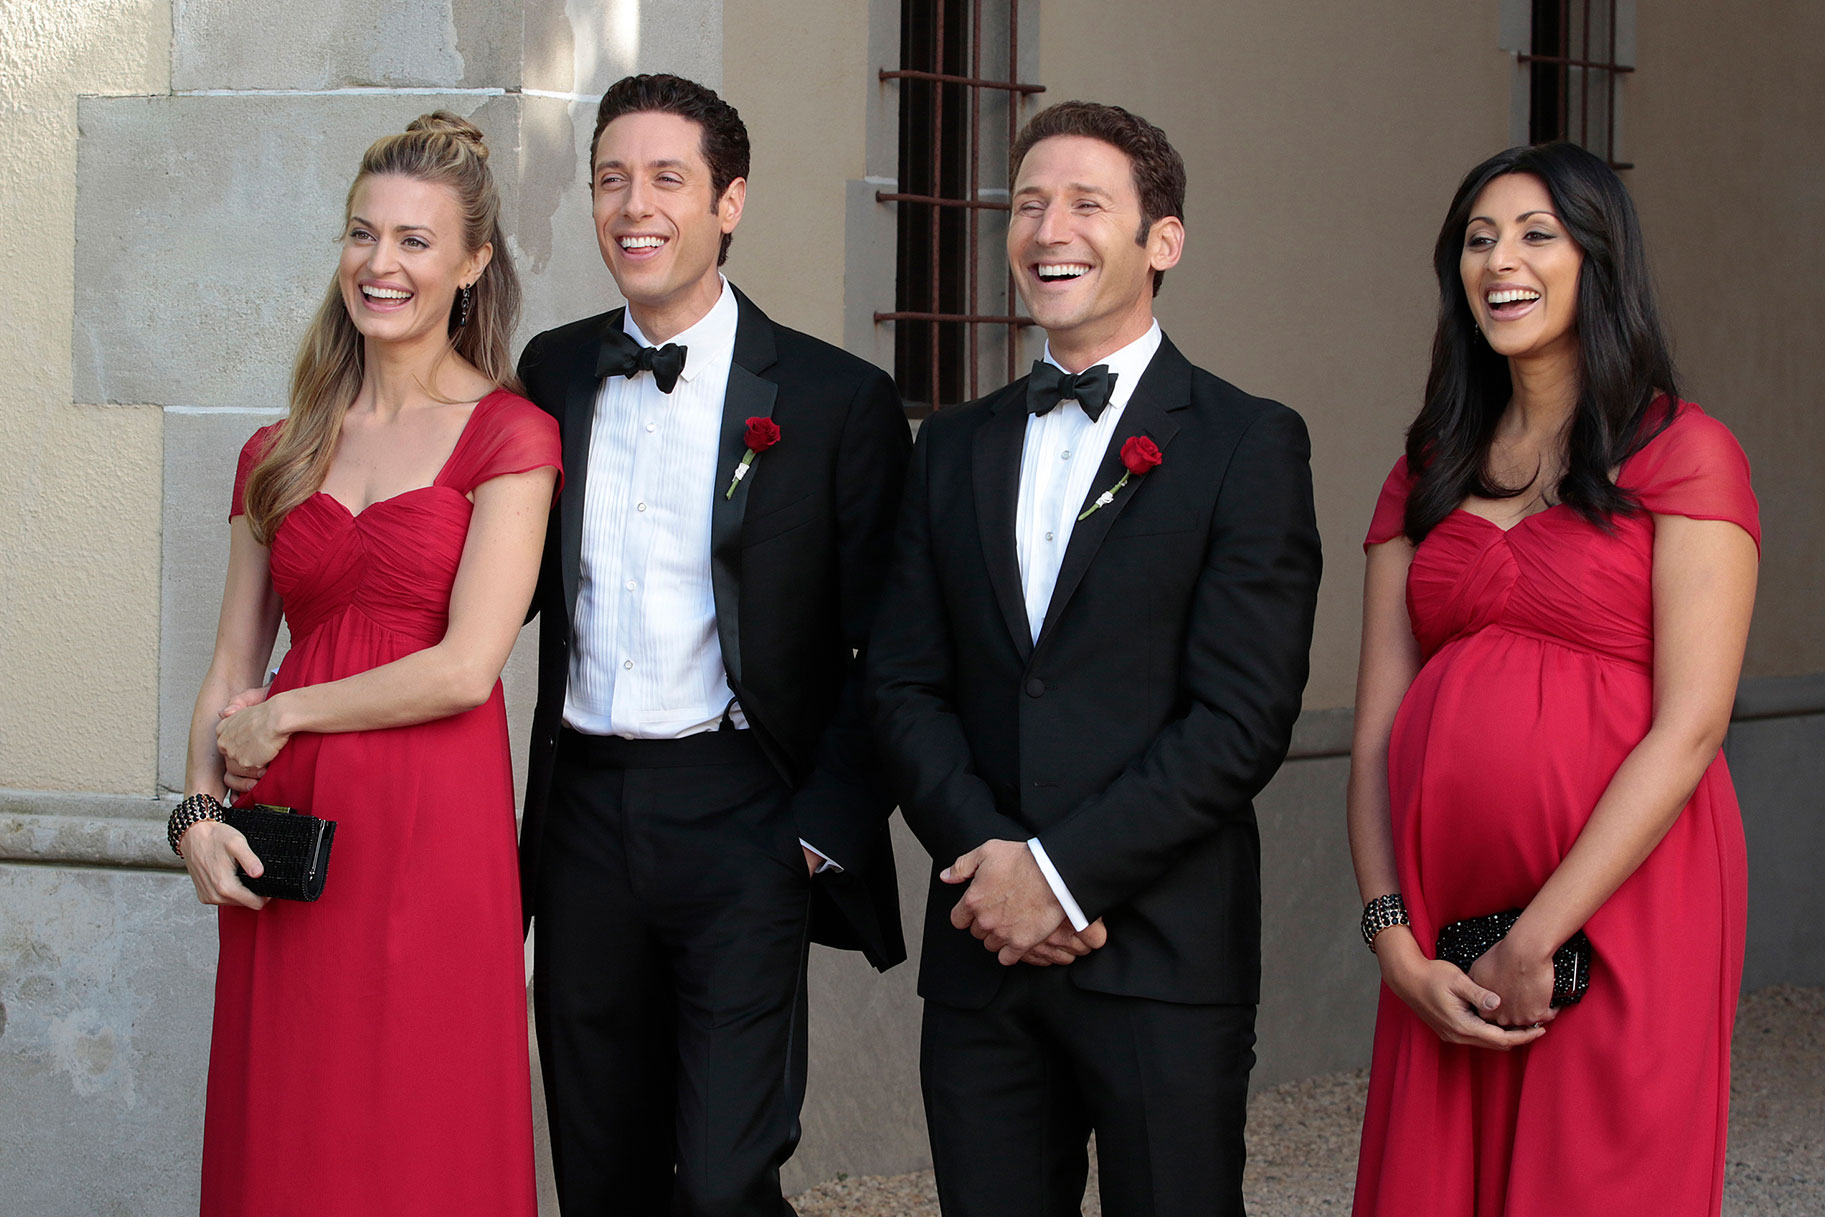 Brooke D'Orsay as Paige Collins, Paulo Costanzo as Evan Lawson, Mark Feuerstein as Dr. Hank Lawson, Reshma Shetty as Divya Katdare